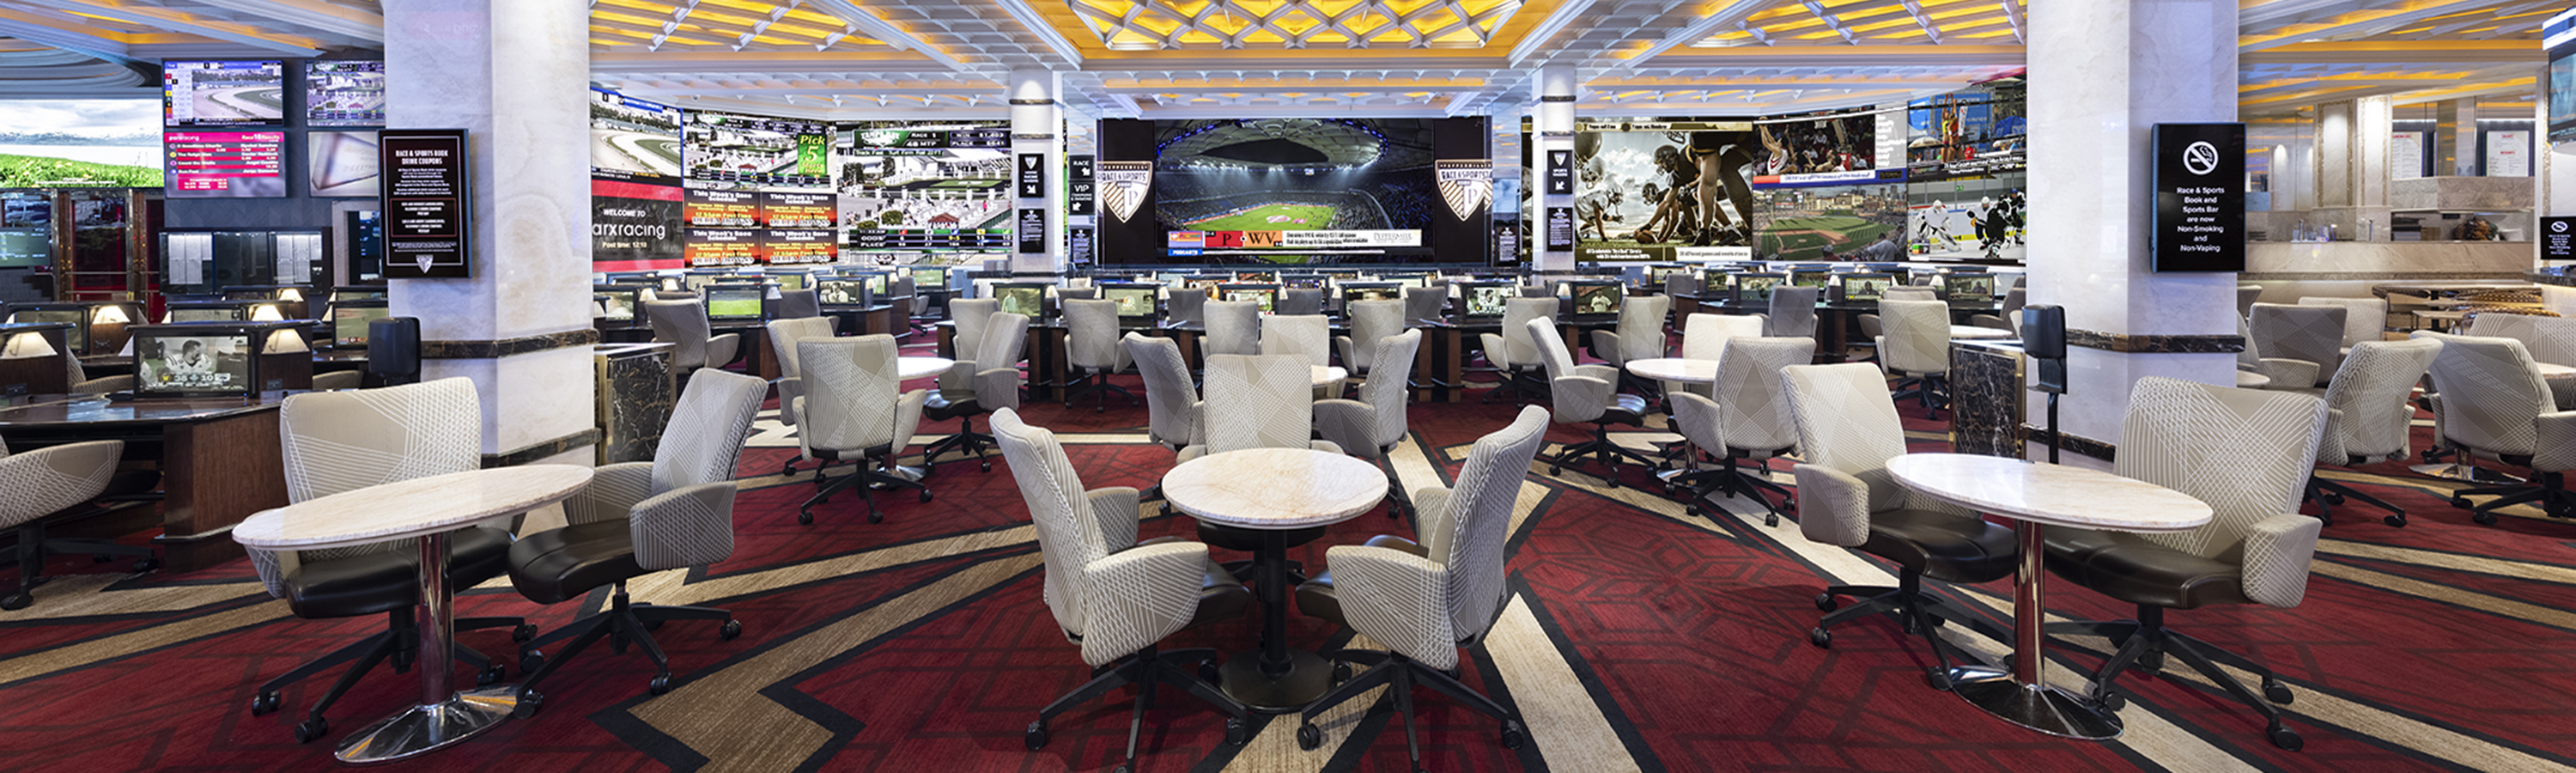 Reno casinos sports betting best sports bookmakers